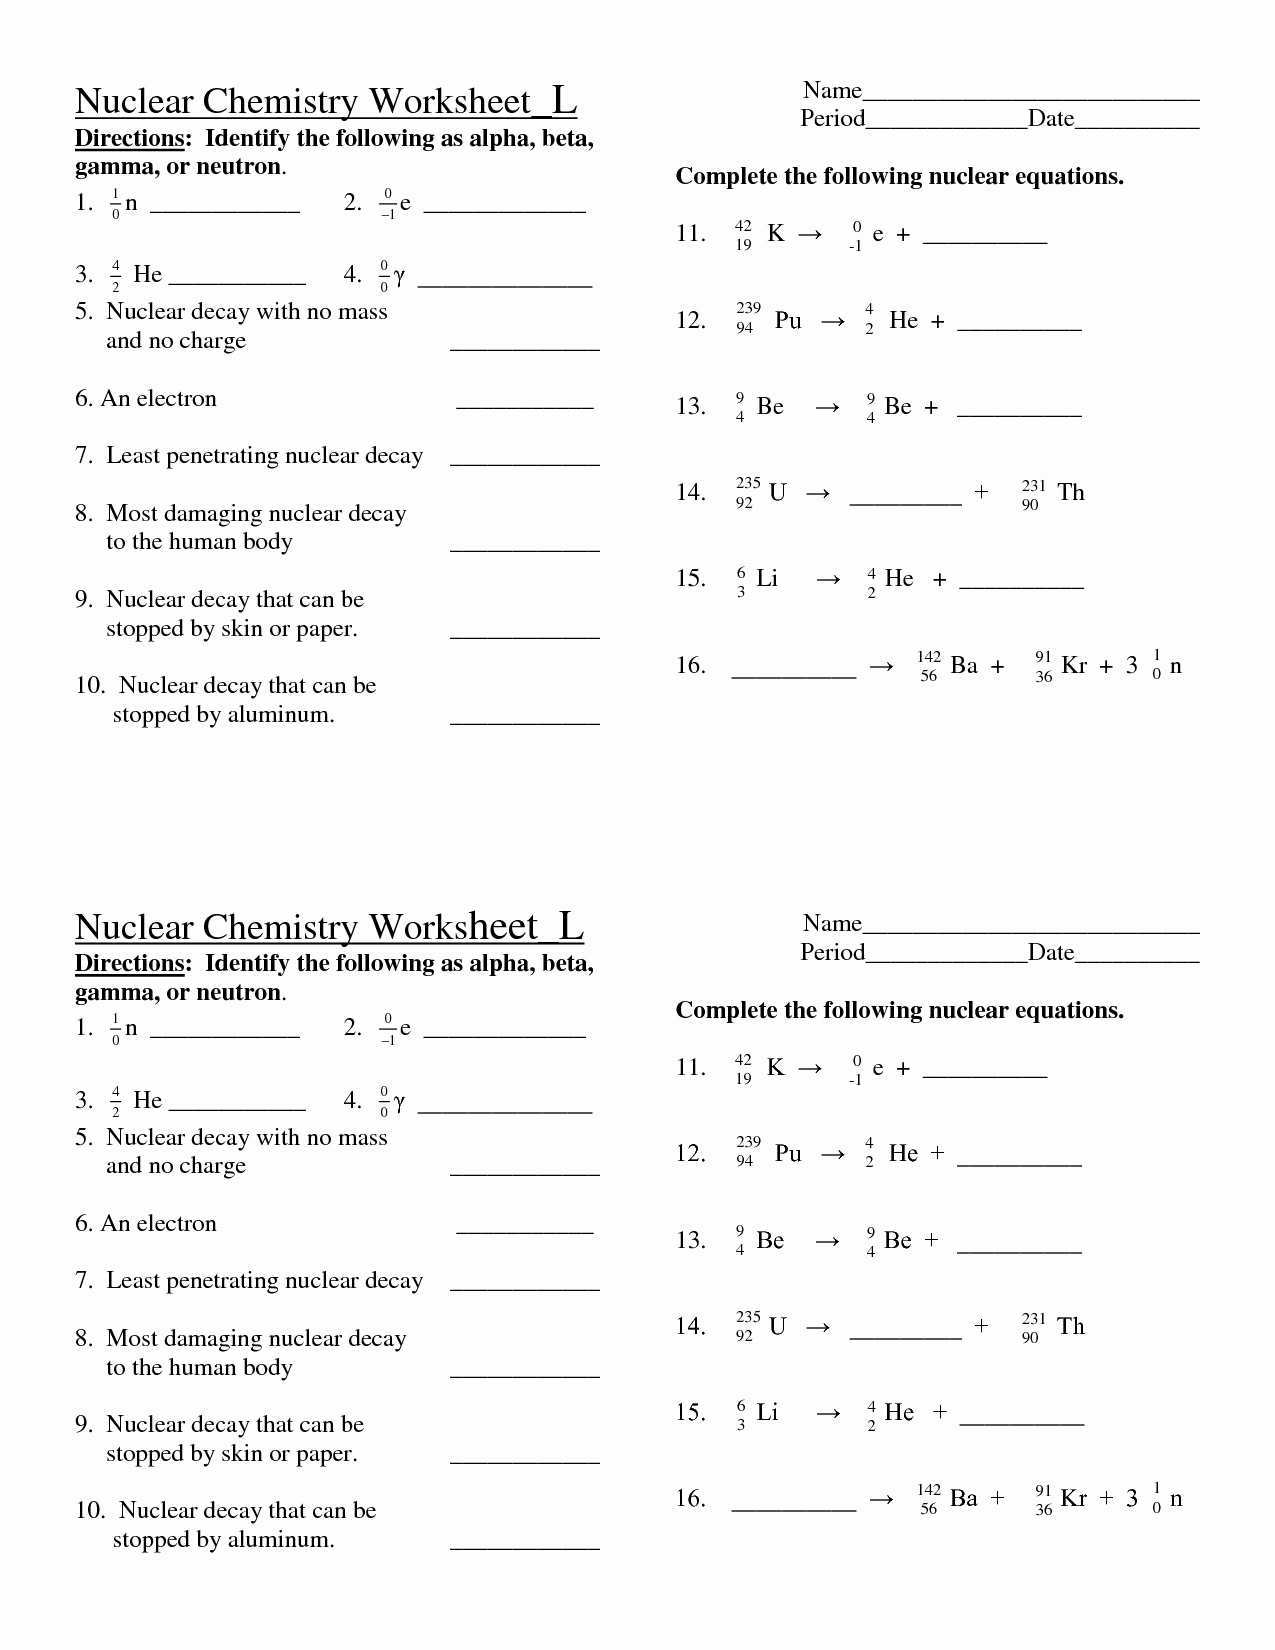 Nuclear Decay Worksheet Answers Key Best Of Nuclear Chemistry Worksheet Doc